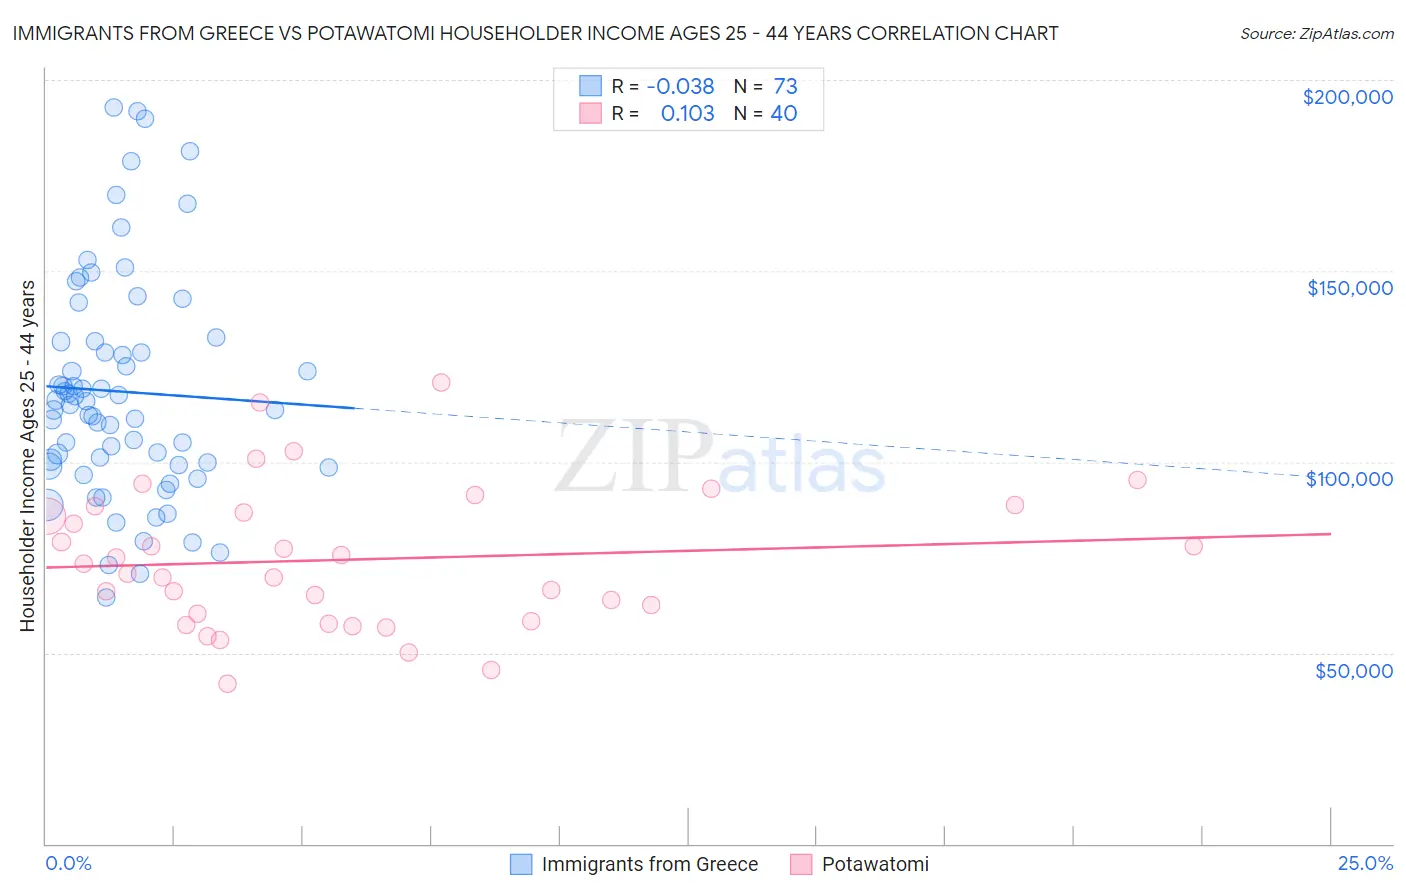 Immigrants from Greece vs Potawatomi Householder Income Ages 25 - 44 years